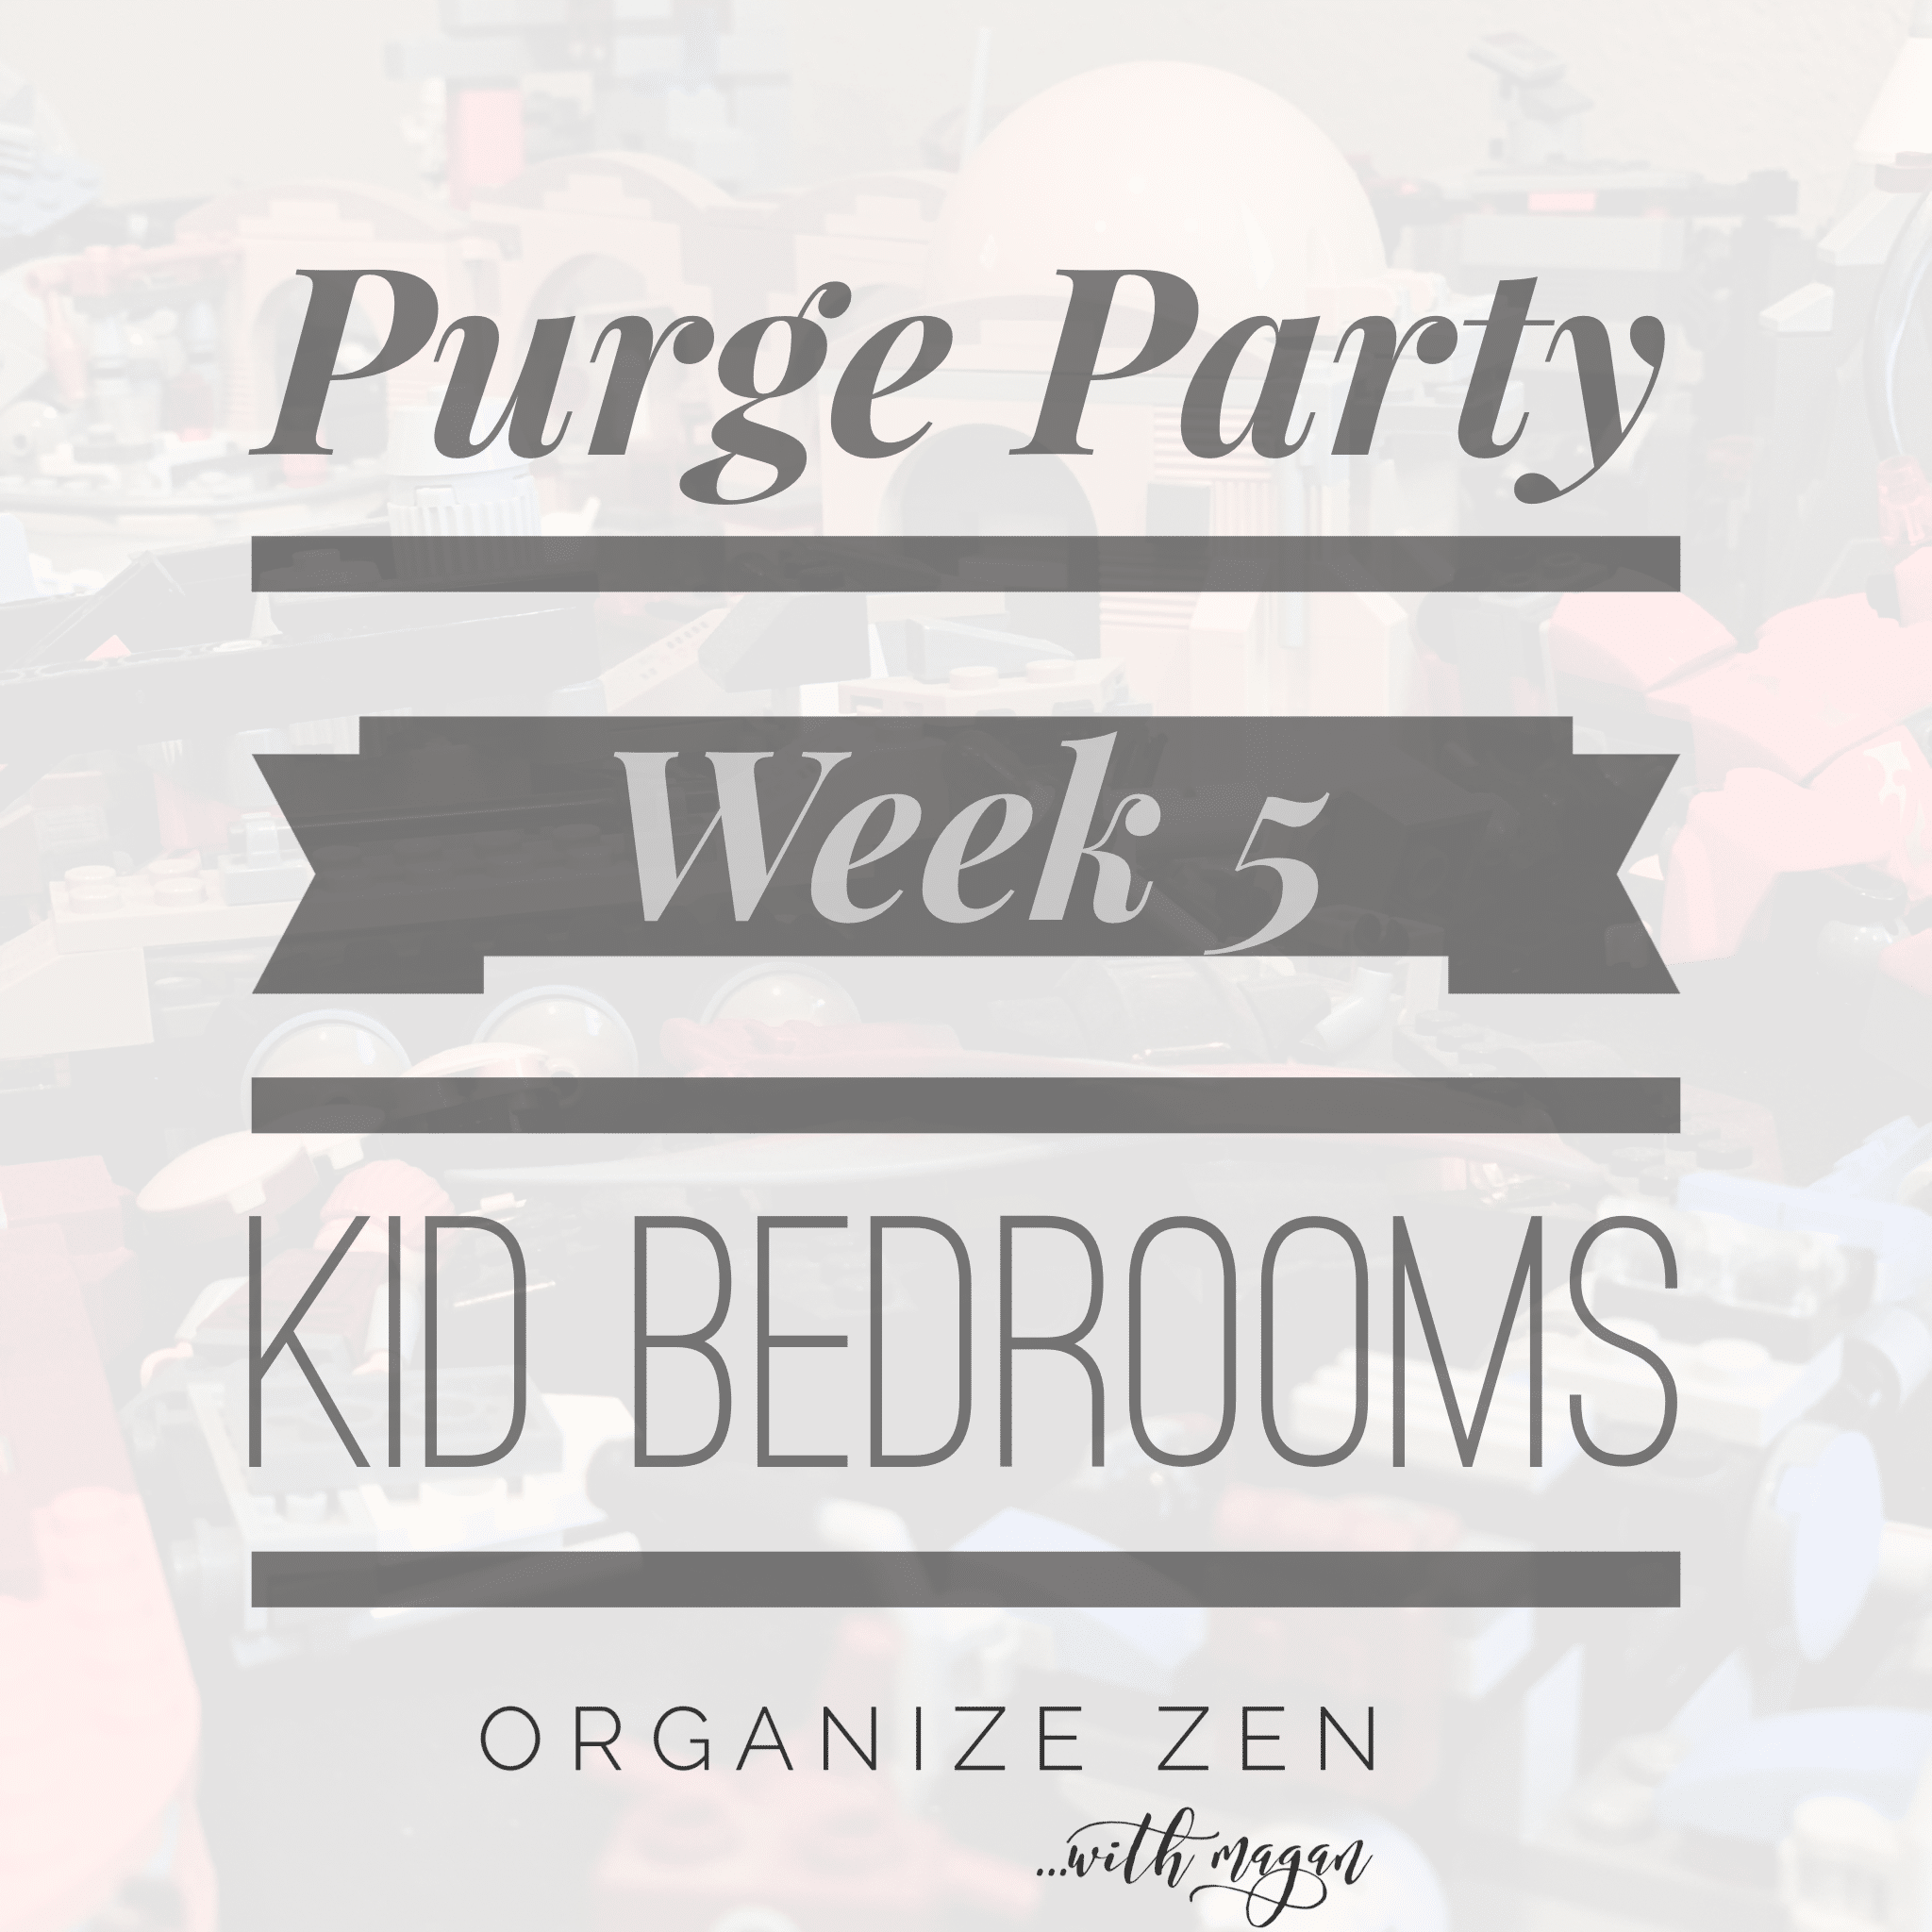 Purge Party in Kids' Bedrooms